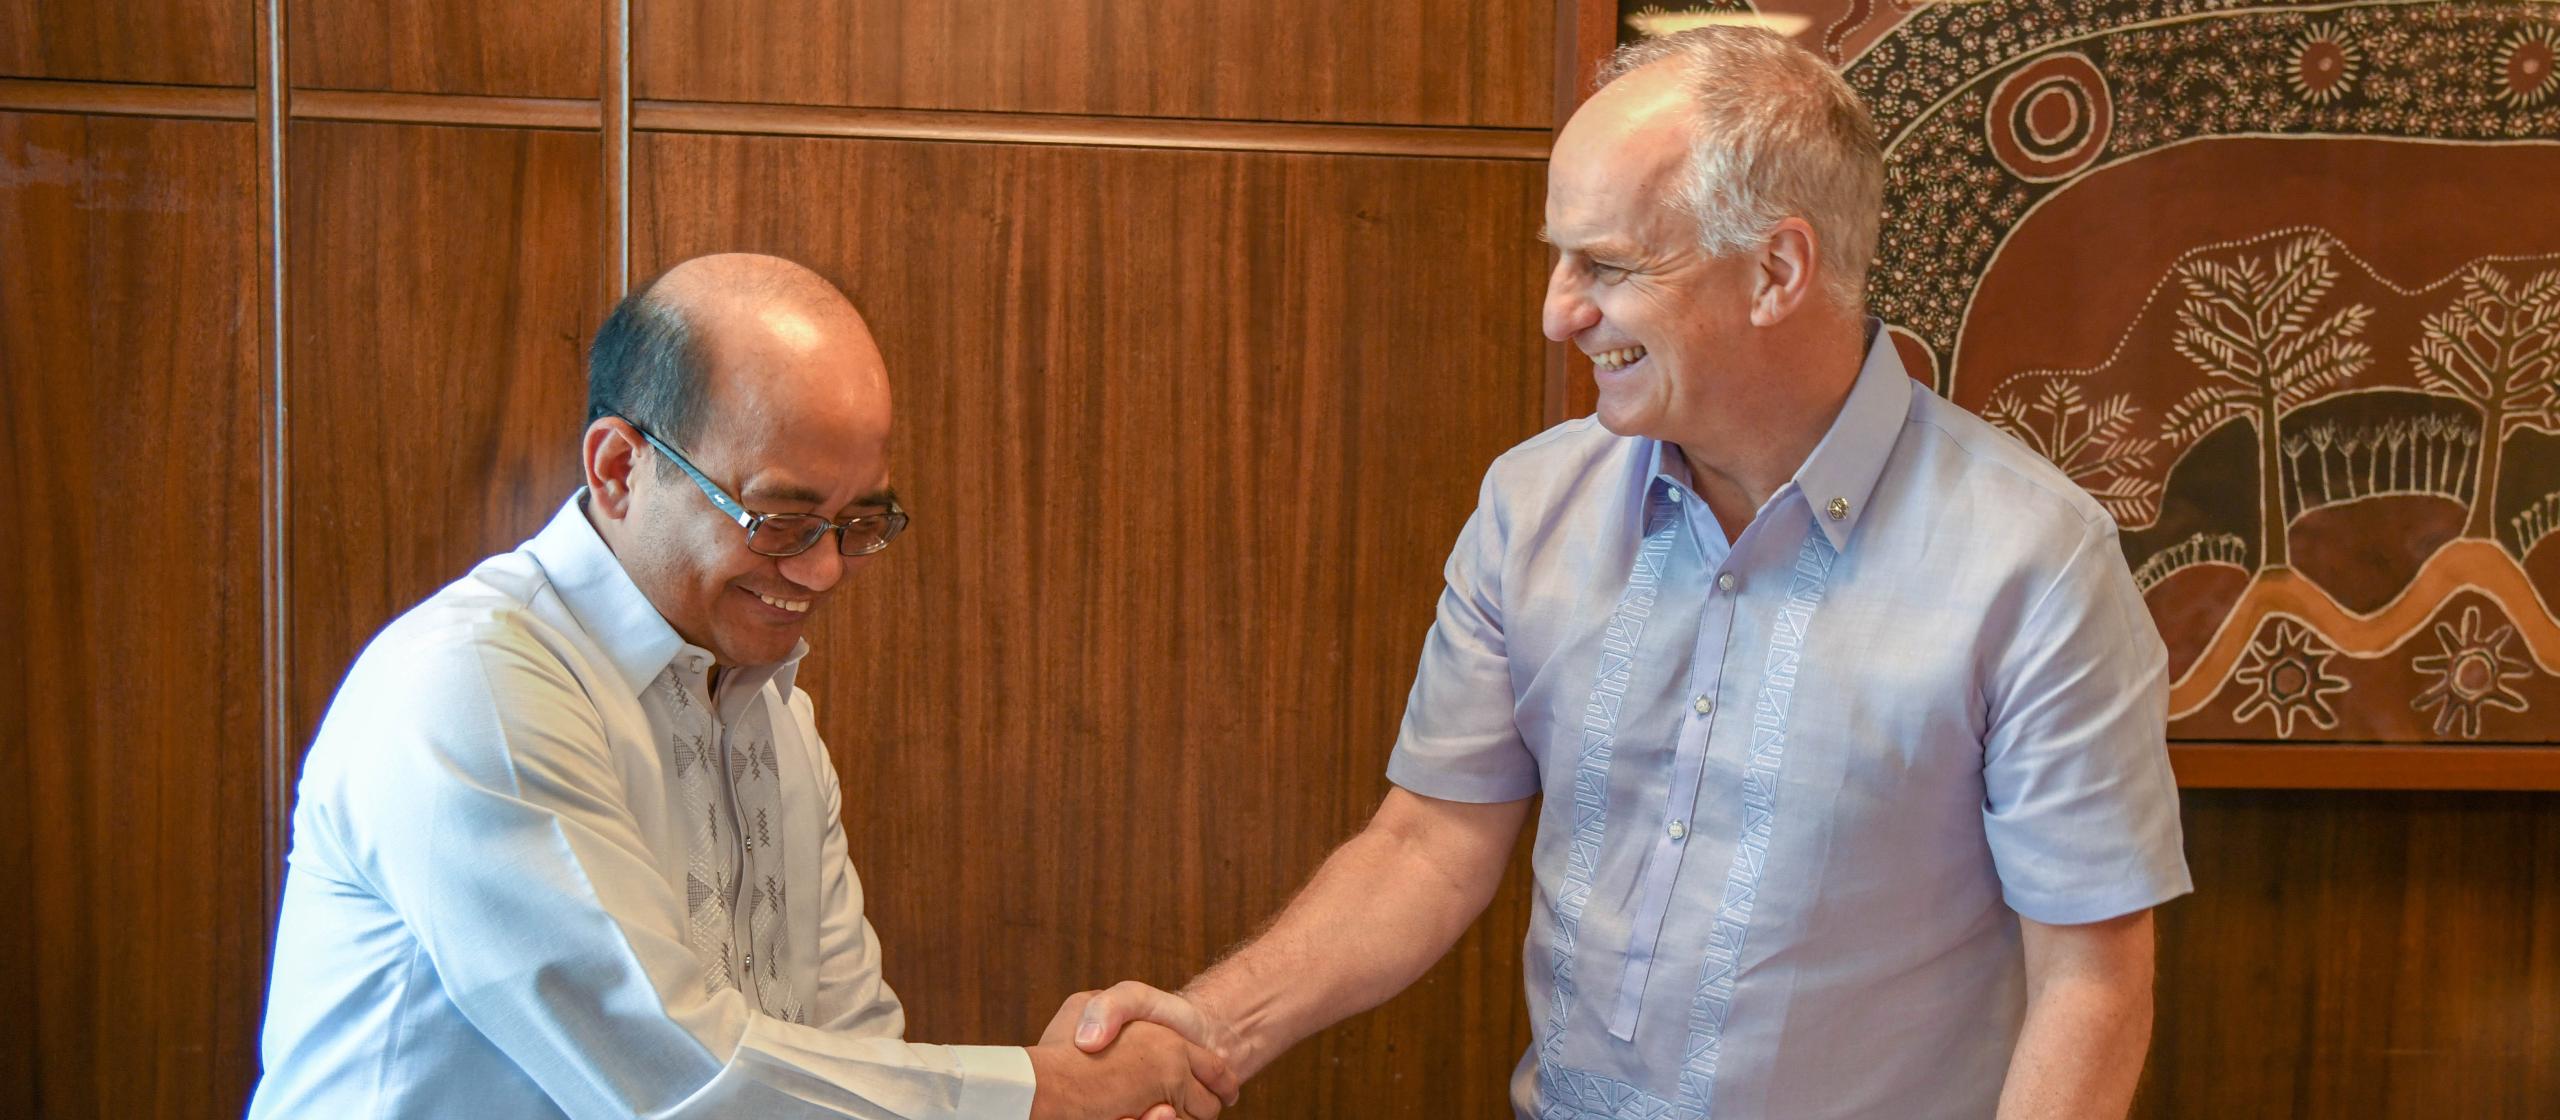 Dr Reynaldo Ebora (left) from PCAARRD shakes hands with ACIAR CEO, Professor Andrew Campbell (right), after signing a partnering agreement that will see the two organisations continue to share interest and commitment in identifying and providing solutions to AANR problems in the Philippines through research and development.   A key aspect of the partnership is that ACIAR and PCAARRD will continue to work together in a respectful, open, and trusting manner with mutual accountability and commitment to produce